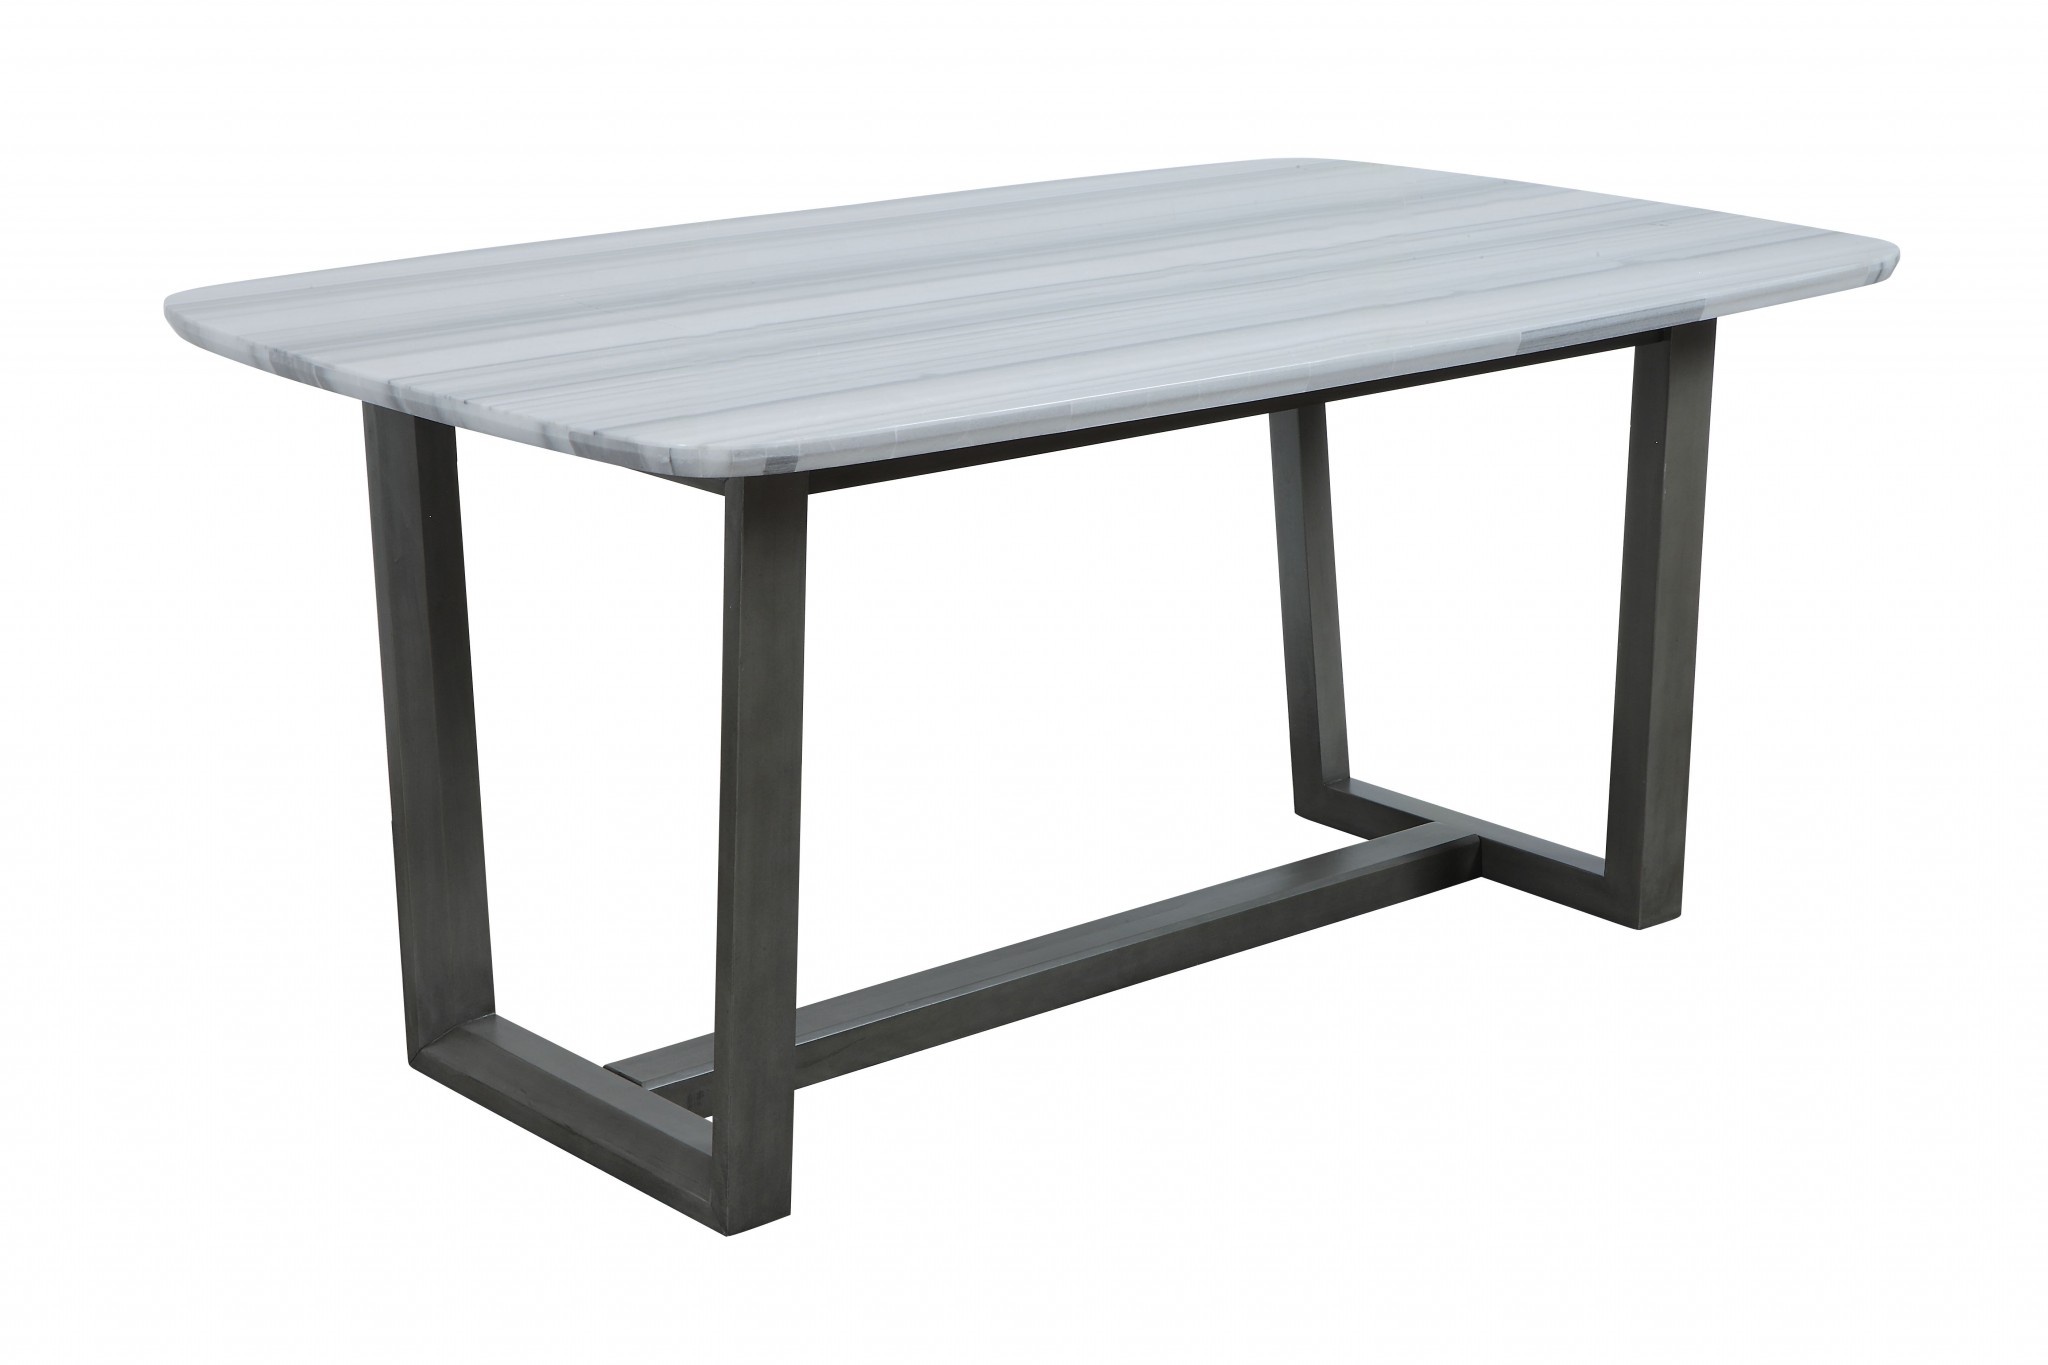 40" X 72" X 30" Marble Gray Oak Wood Marble Dining Table